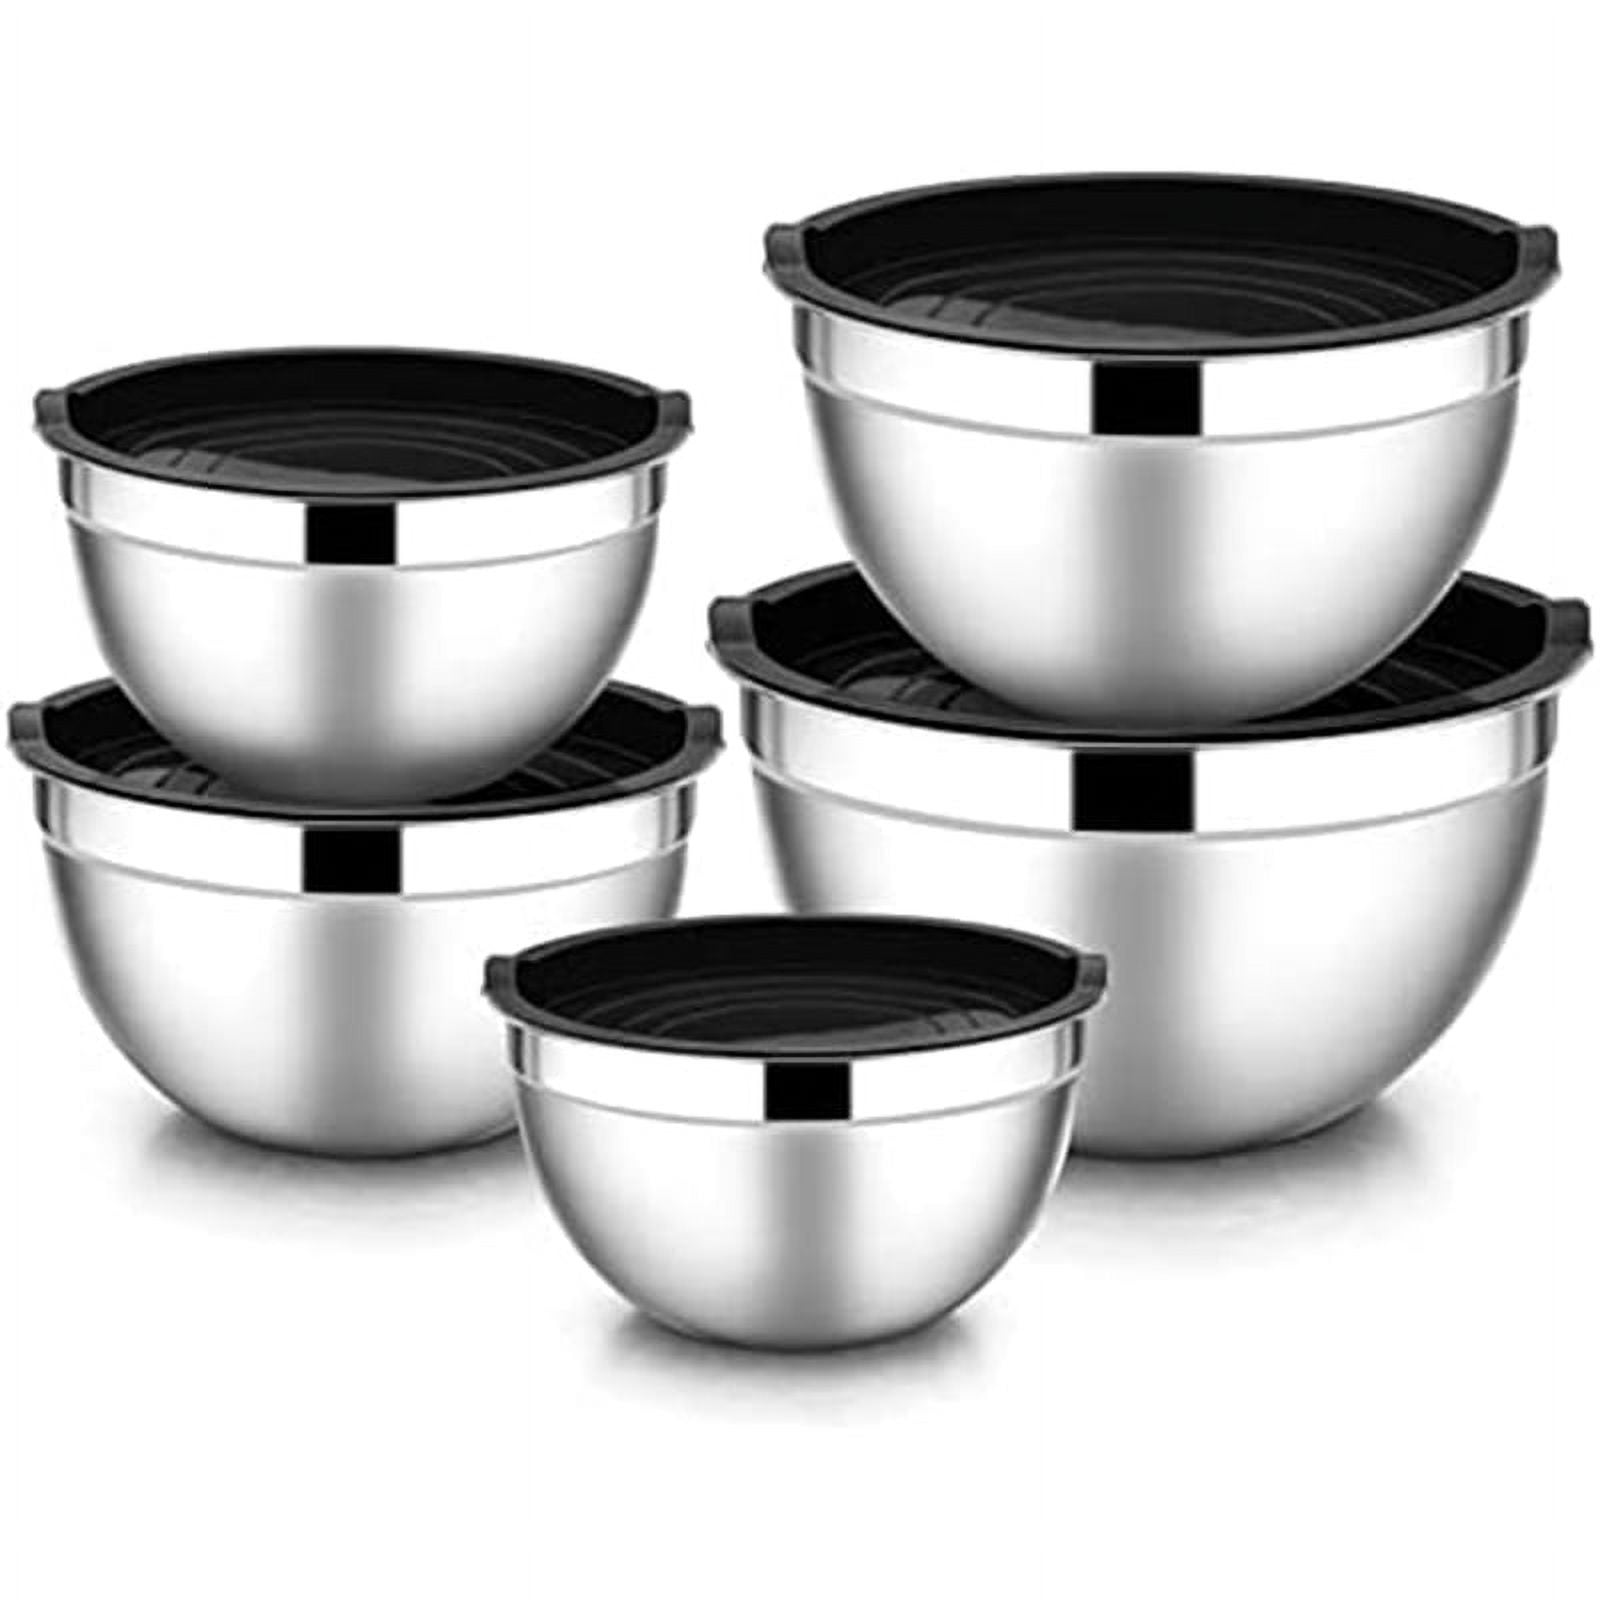  Pinnacle Plate Stainless Steel Mixing Bowls - 5 Pack Nesting  Baking Supplies for Cooking, Serving, Food Prep - Dishwasher Kitchen Set,  Stackable Salad Bowl for Easy Storage: Home & Kitchen